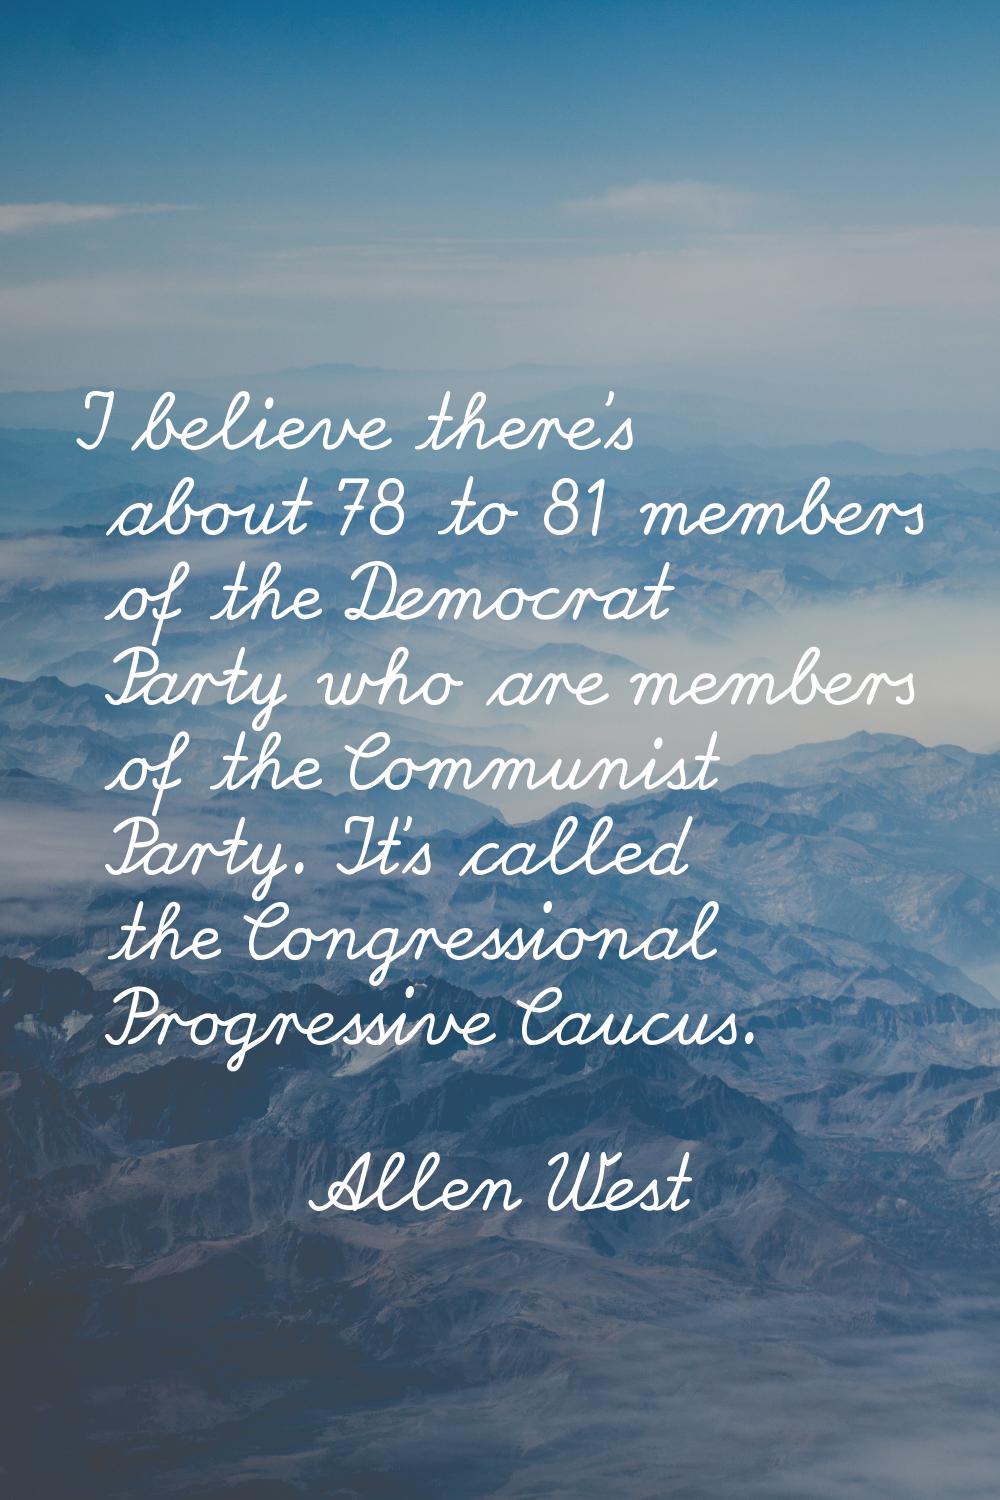 I believe there's about 78 to 81 members of the Democrat Party who are members of the Communist Par